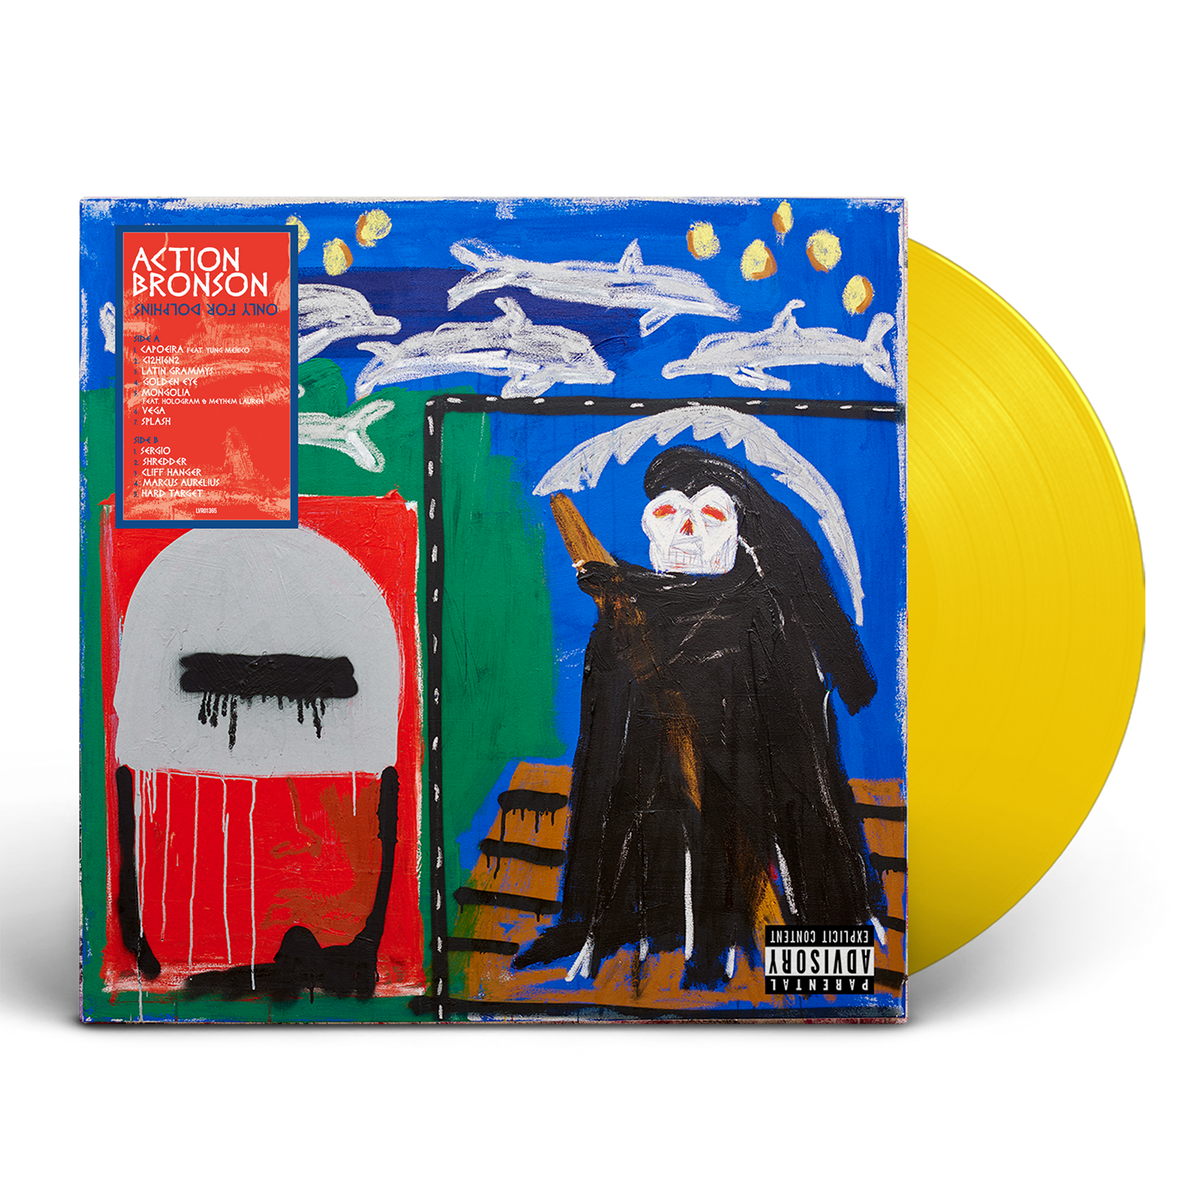 Action Bronson - Only for Dolphins Limited Edition Yellow ...